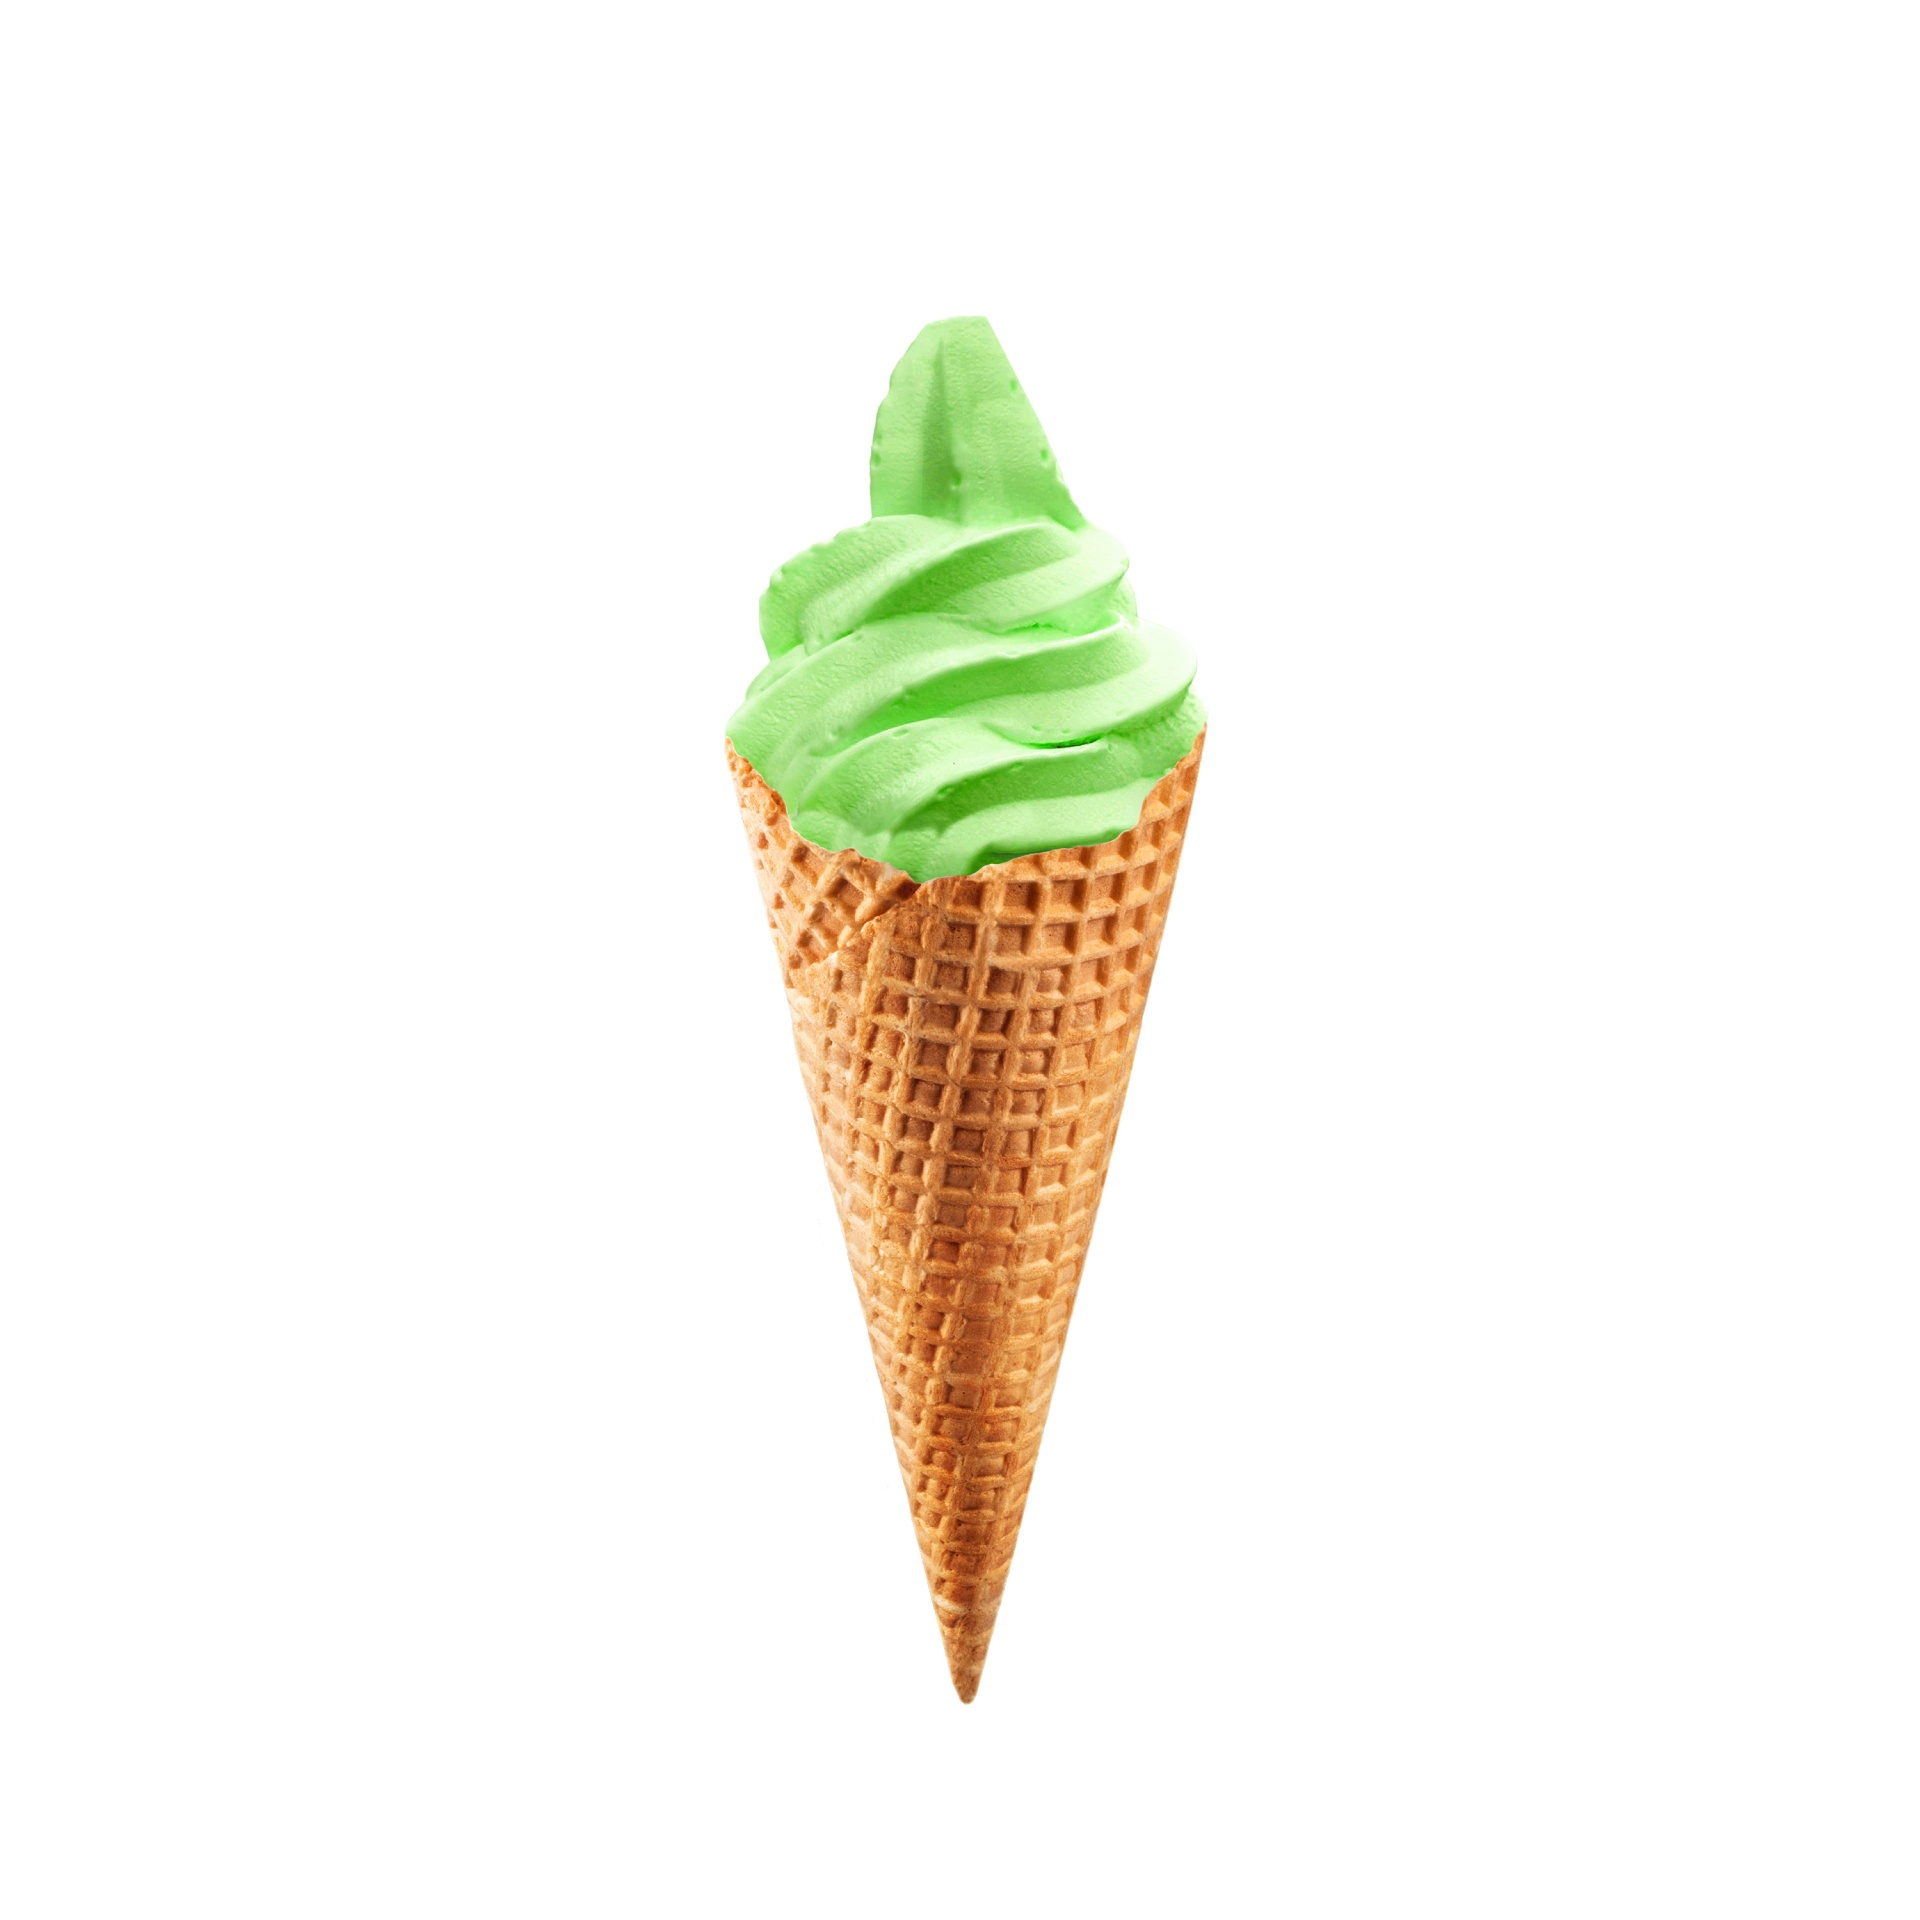 ice-cream-in-a-cone-free-stock-photo-public-domain-pictures